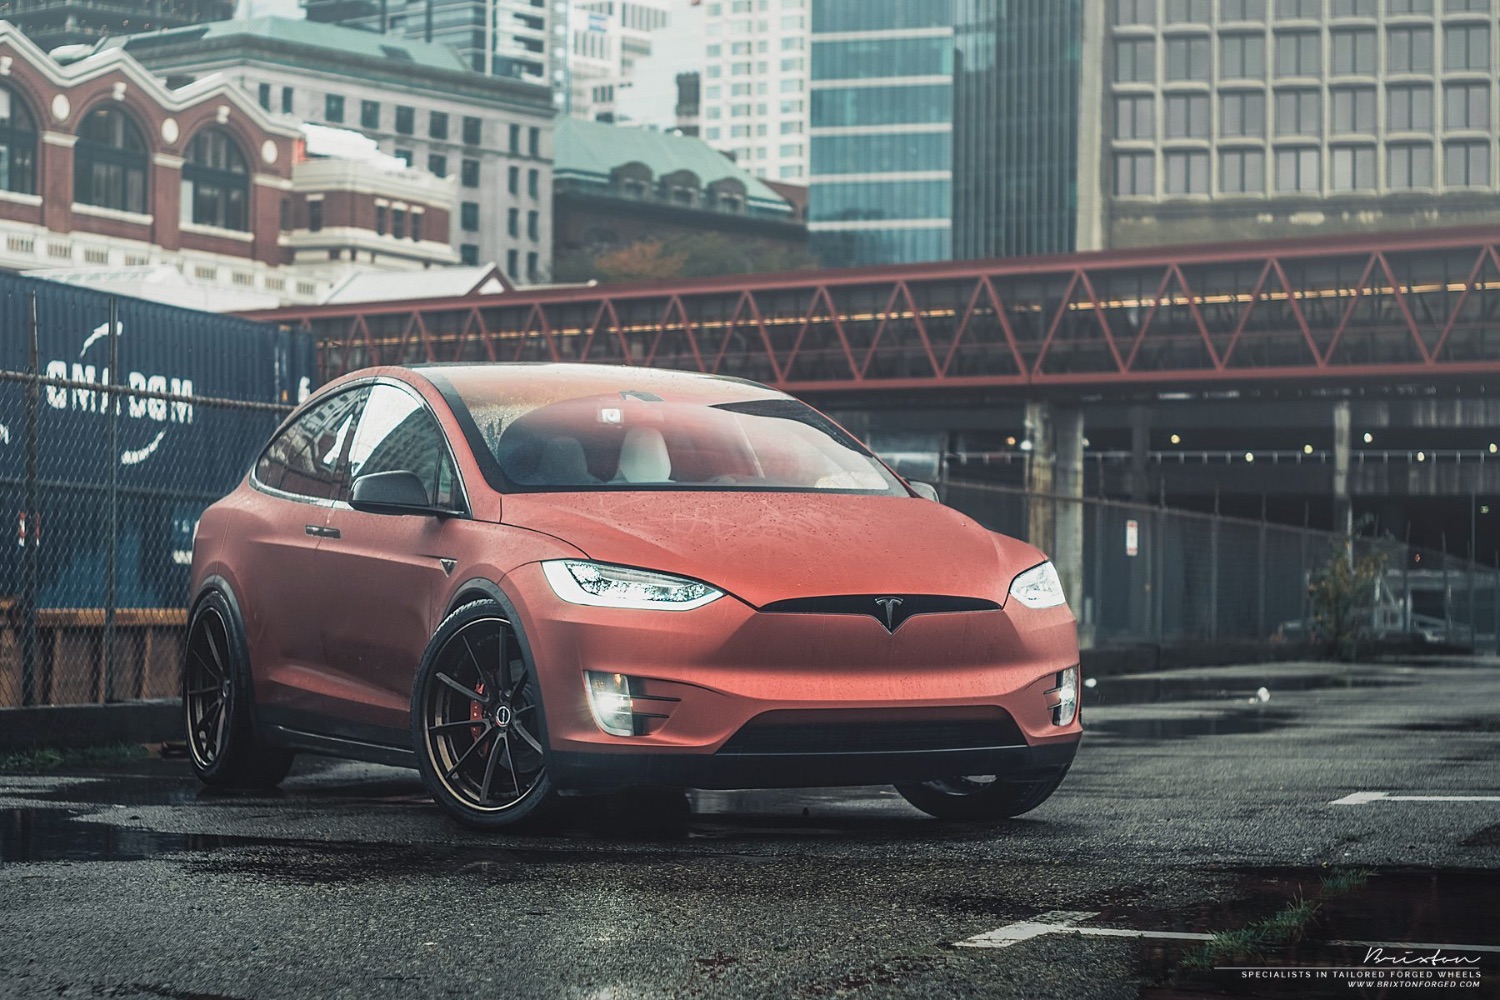 brixton-forged-red-tesla-model-x-wheels-brixton-forged-wr3-targa-series-22-inch-concave-3-piece-forged-bronze-6-1800x1200